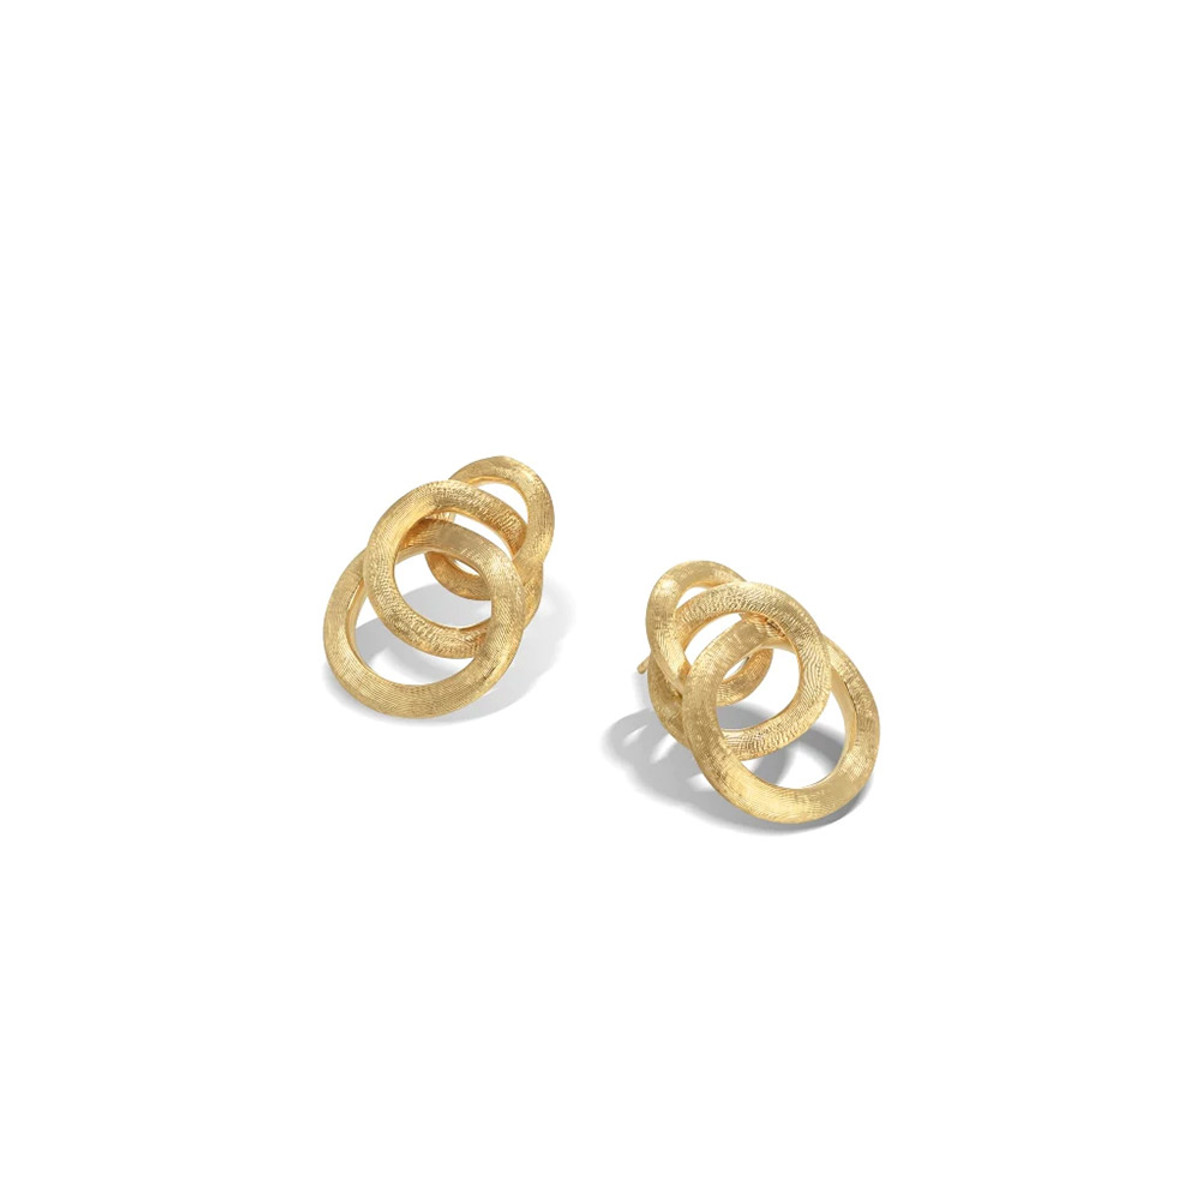 Marco Bicego Jaipur Collection 18K Yellow Gold Small Knot Earrings-47724 Product Image